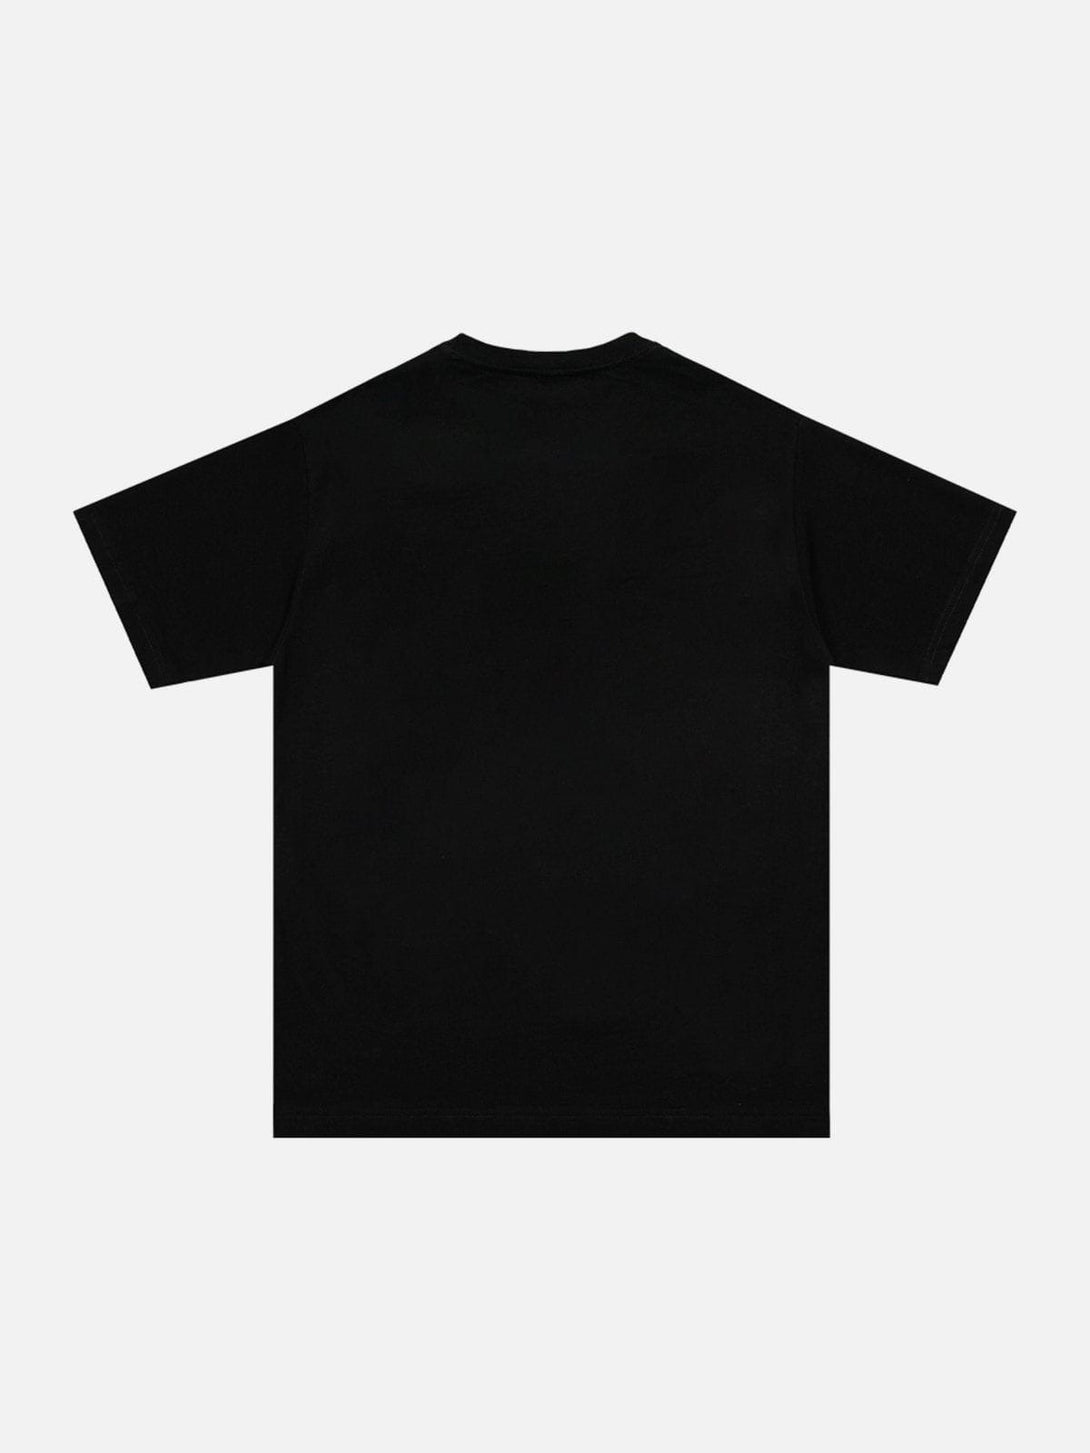 Levefly - Flame Elements Print Tee - Streetwear Fashion - levefly.com